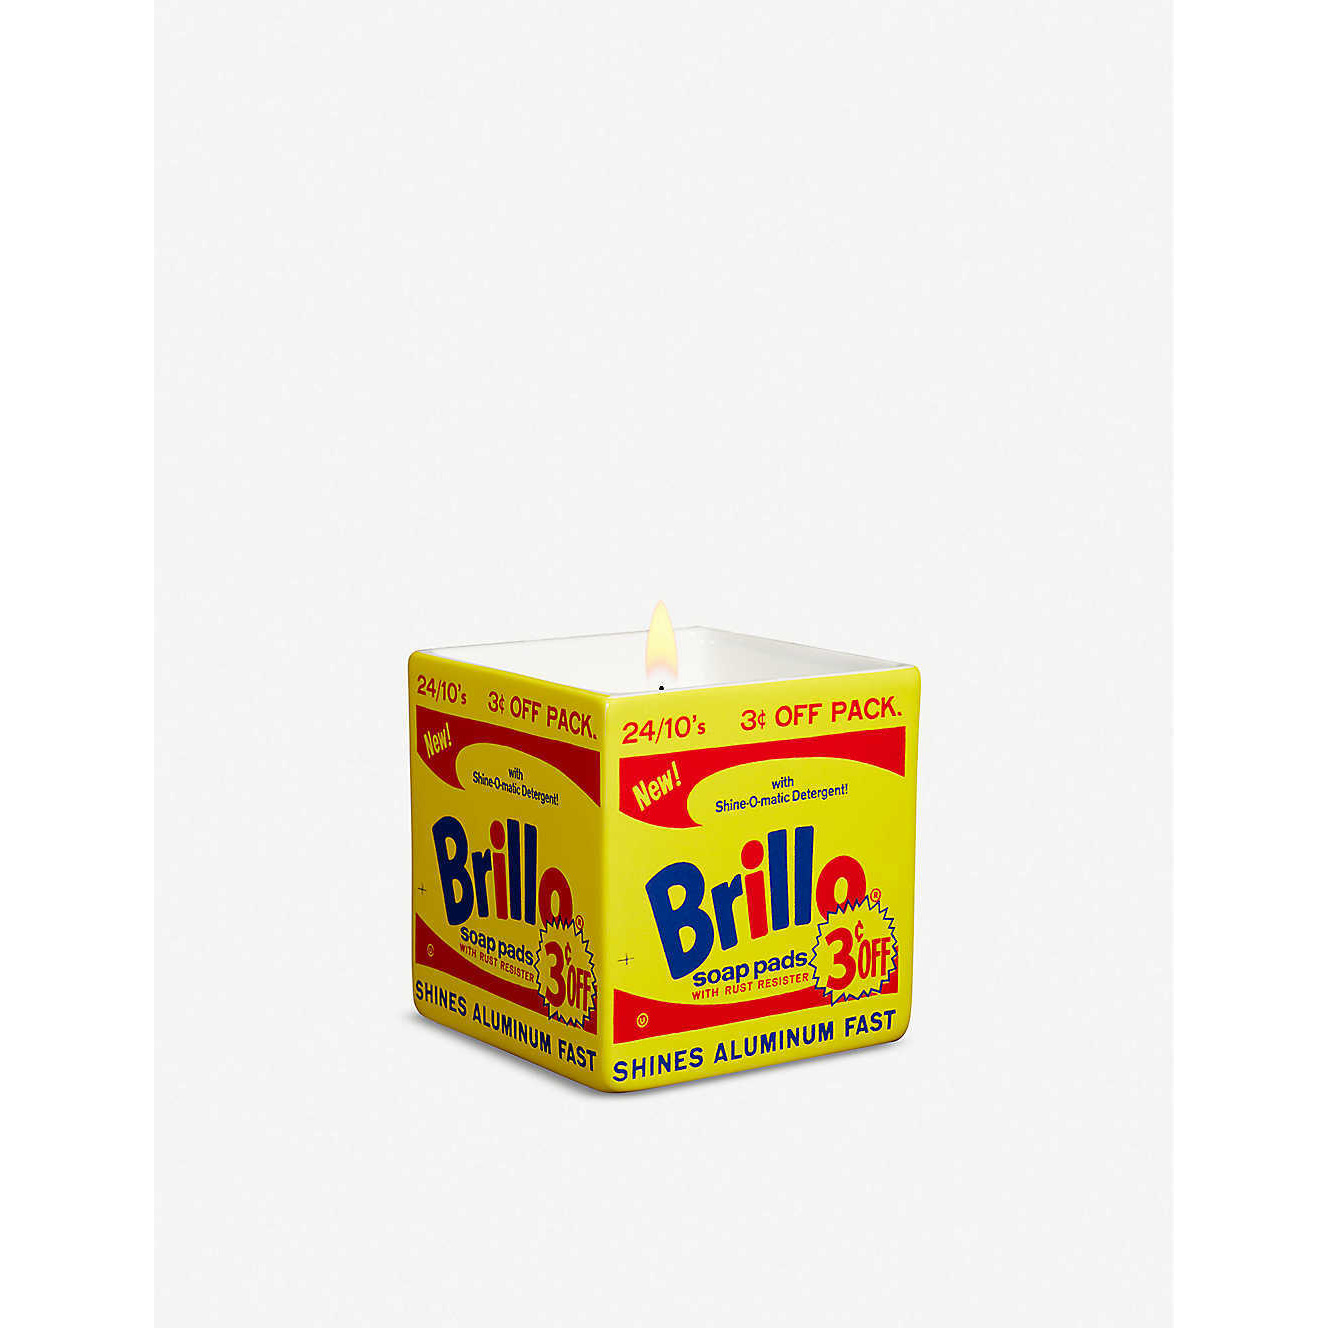 Brillo Box porcelain scented candle 260g